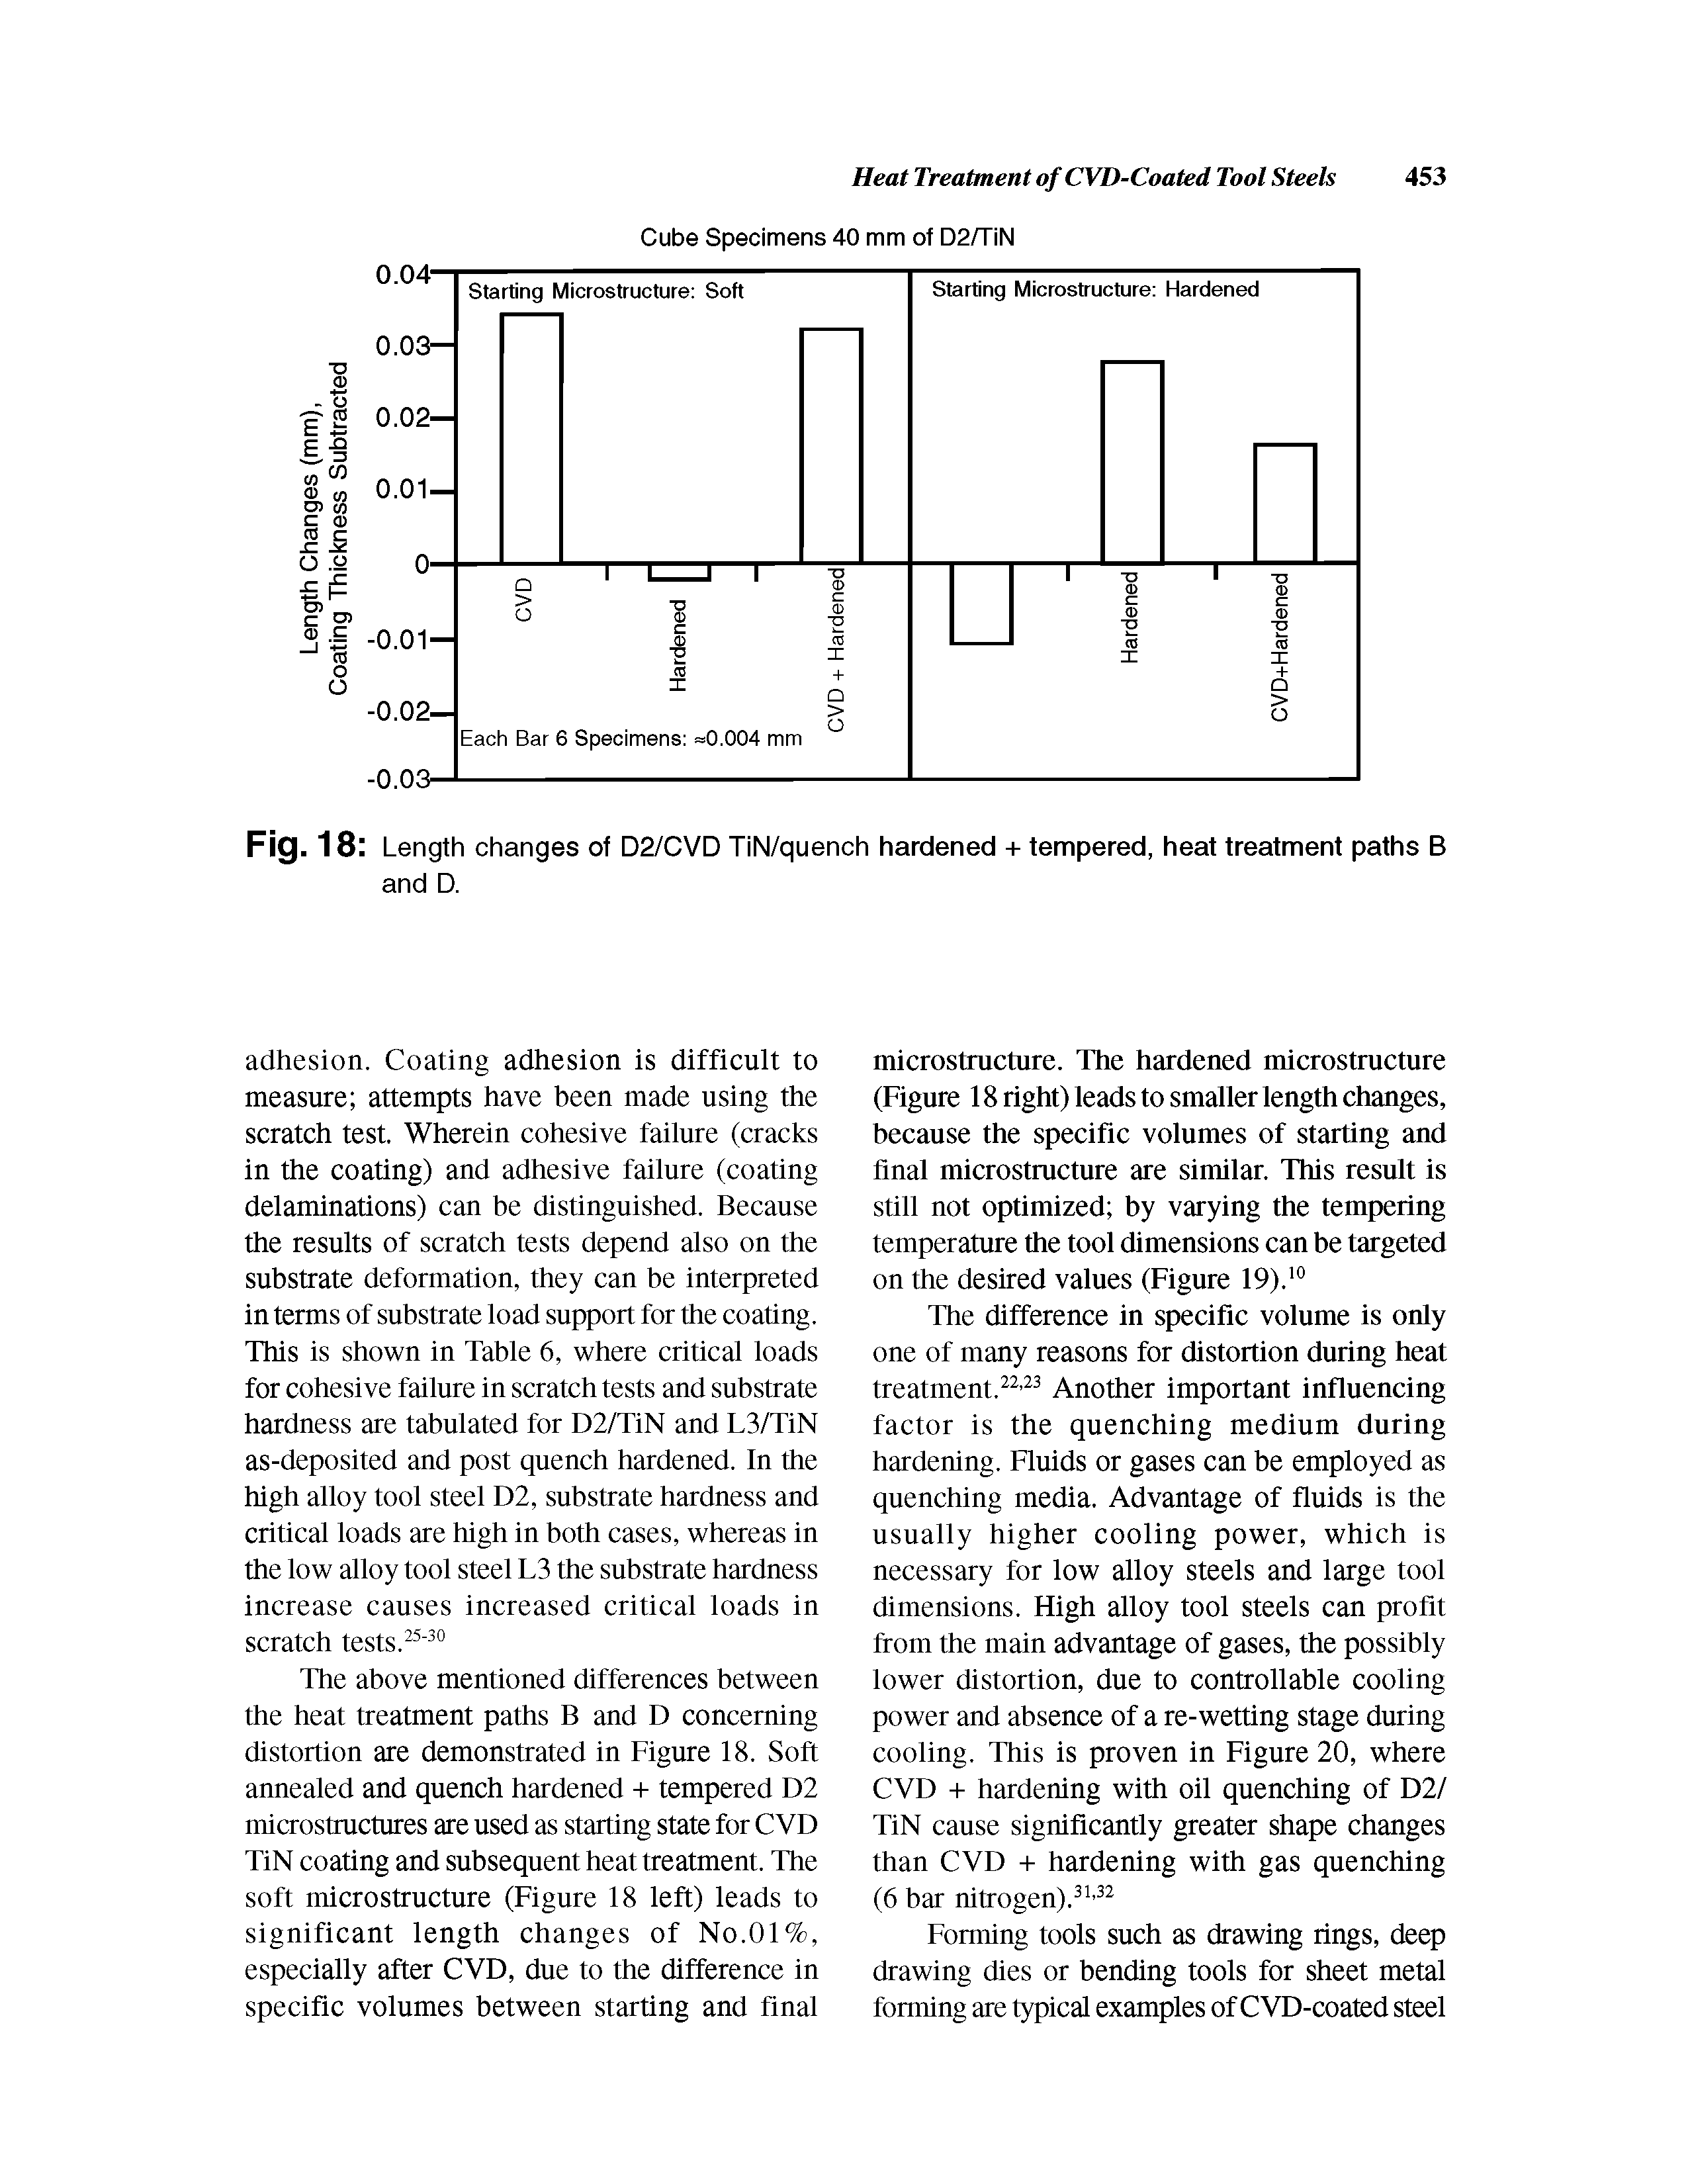 Fig. 18 Length changes of D2/CVD TiN/quench hardened + tempered, heat treatment paths B and D.